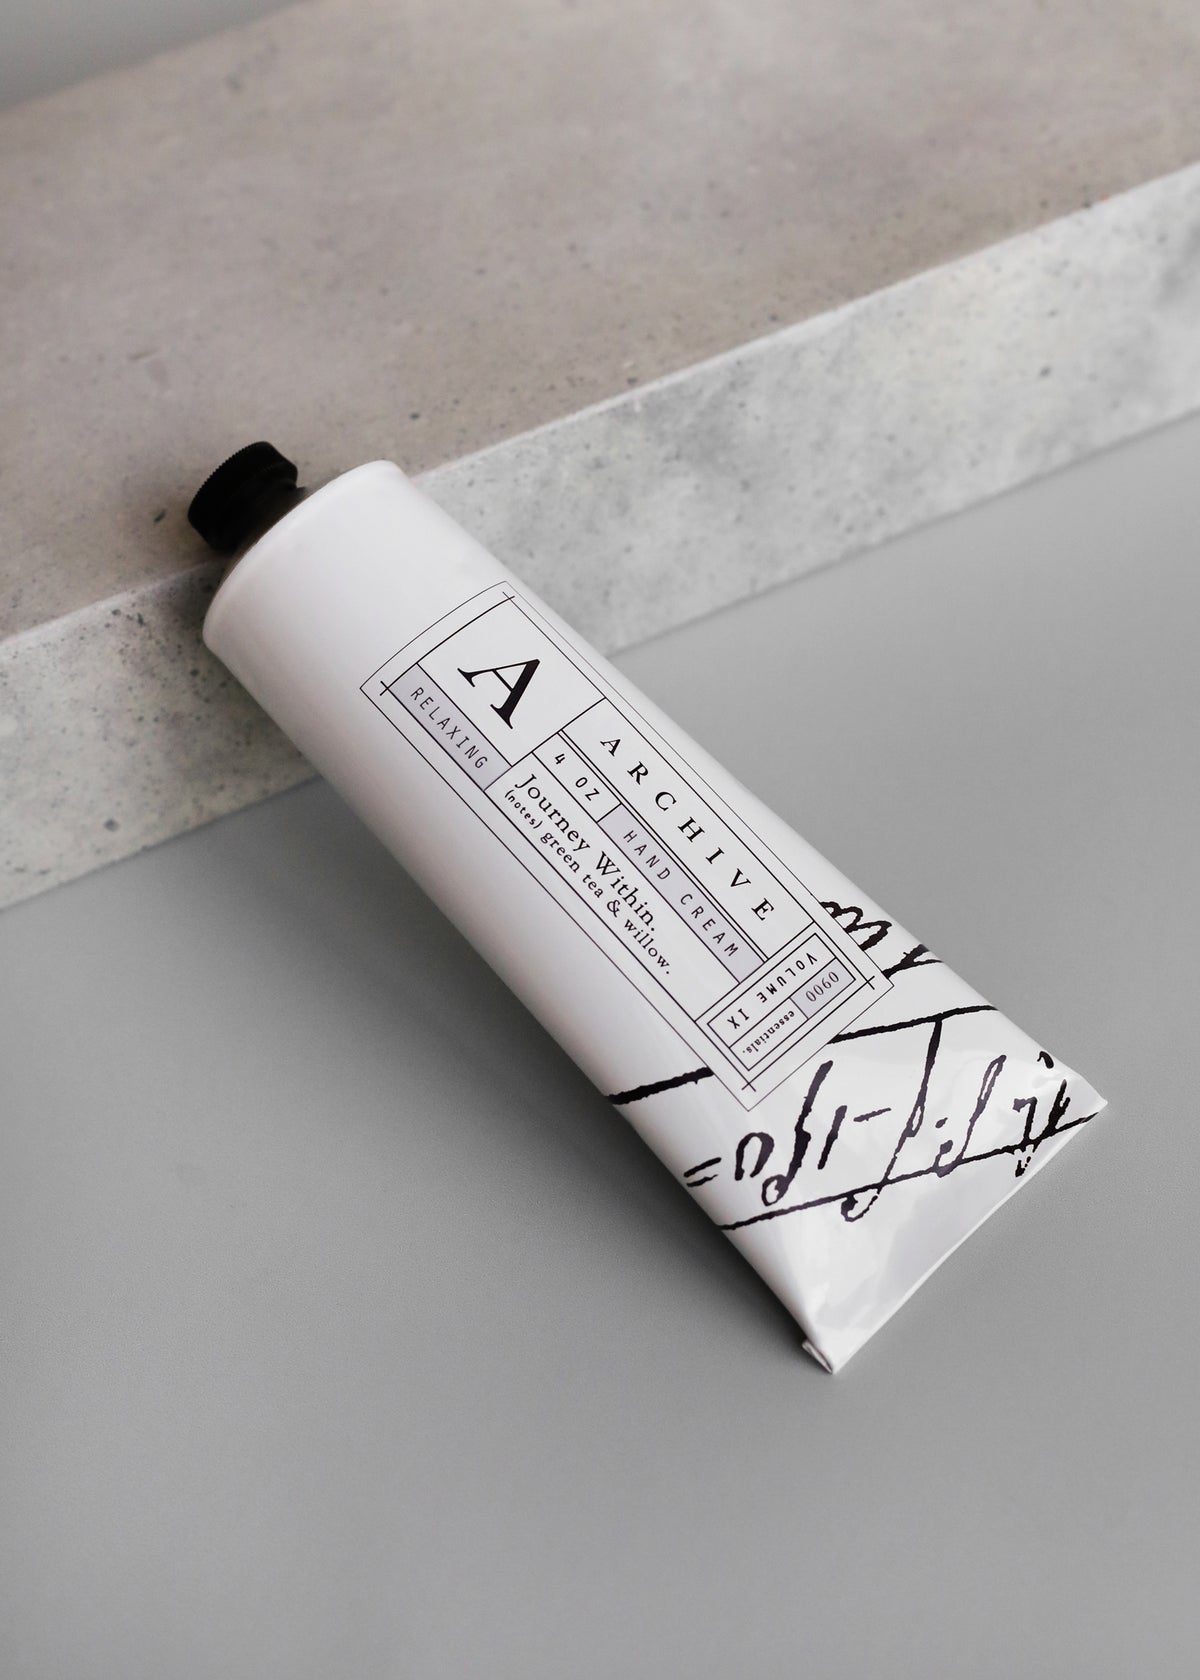 A tube of ARCHIVE by Margot Elena - Journey Within hand cream with a minimalistic black and white design resting on a gray stone surface.